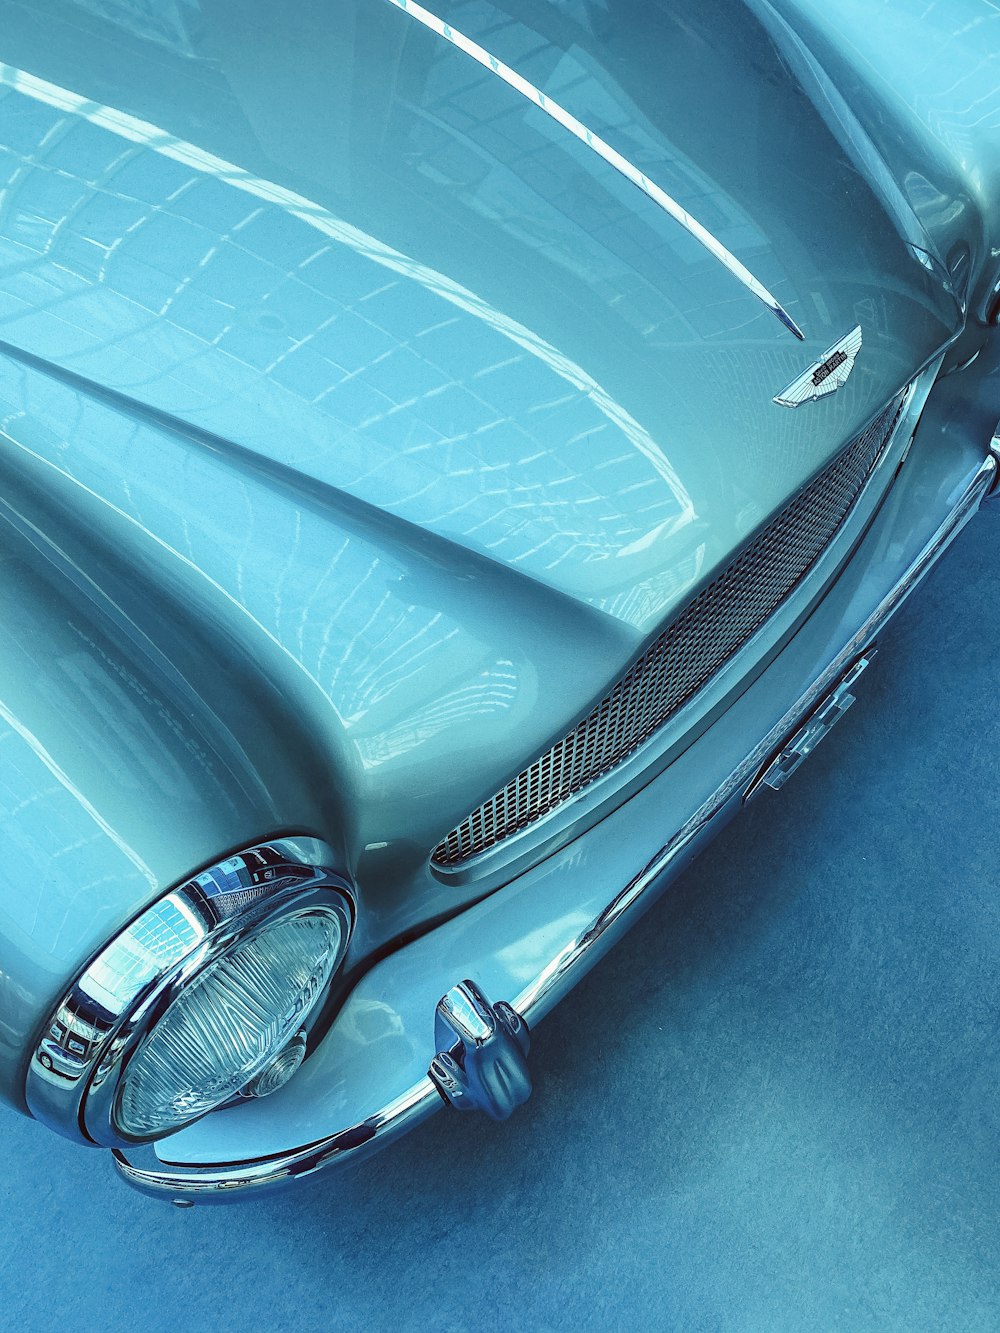 a blue classic car is shown from above